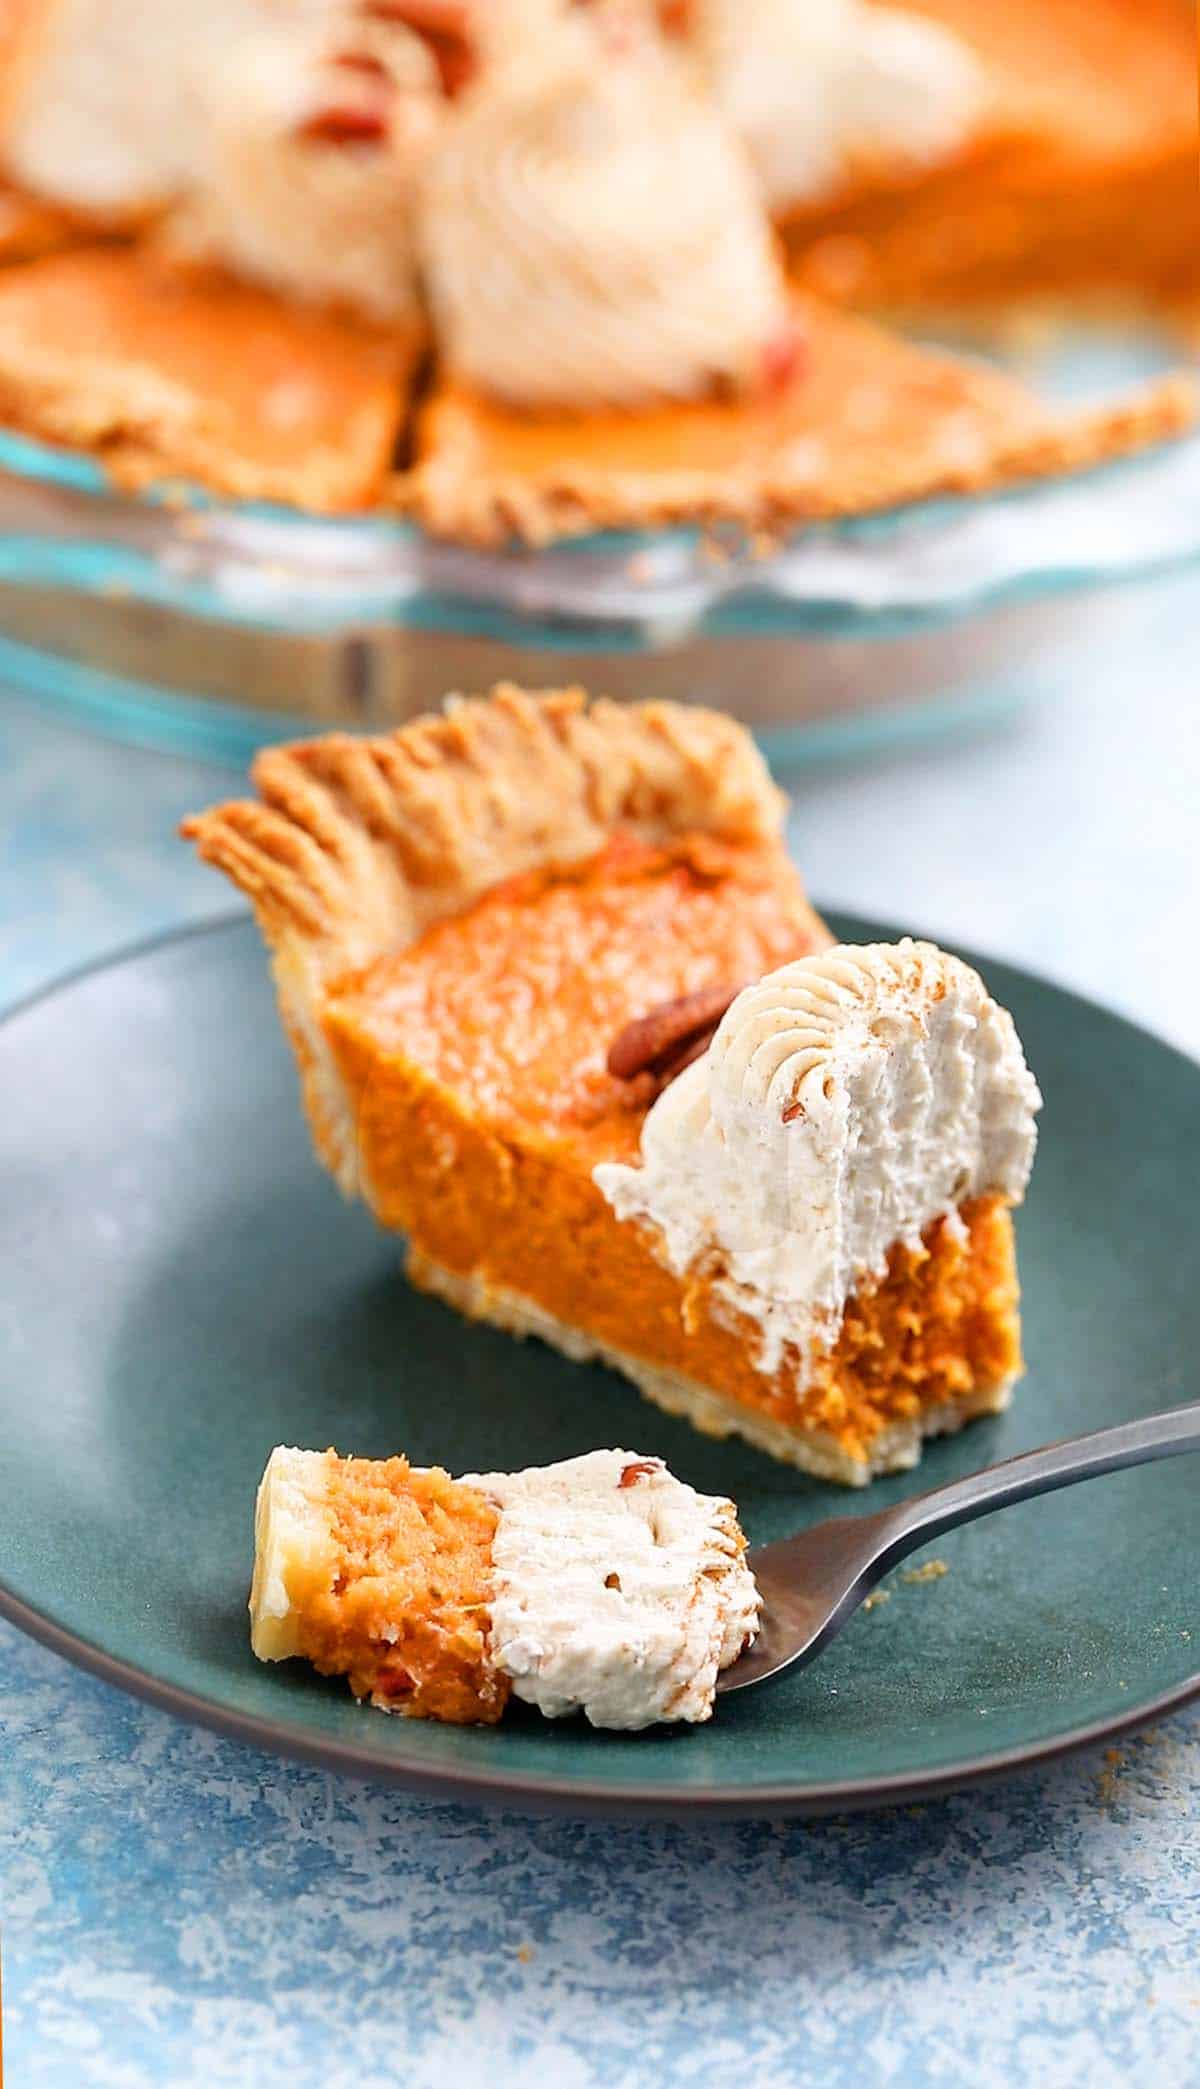 one slice of sweet potato pie on a green plate along with a fork filled with a bite.